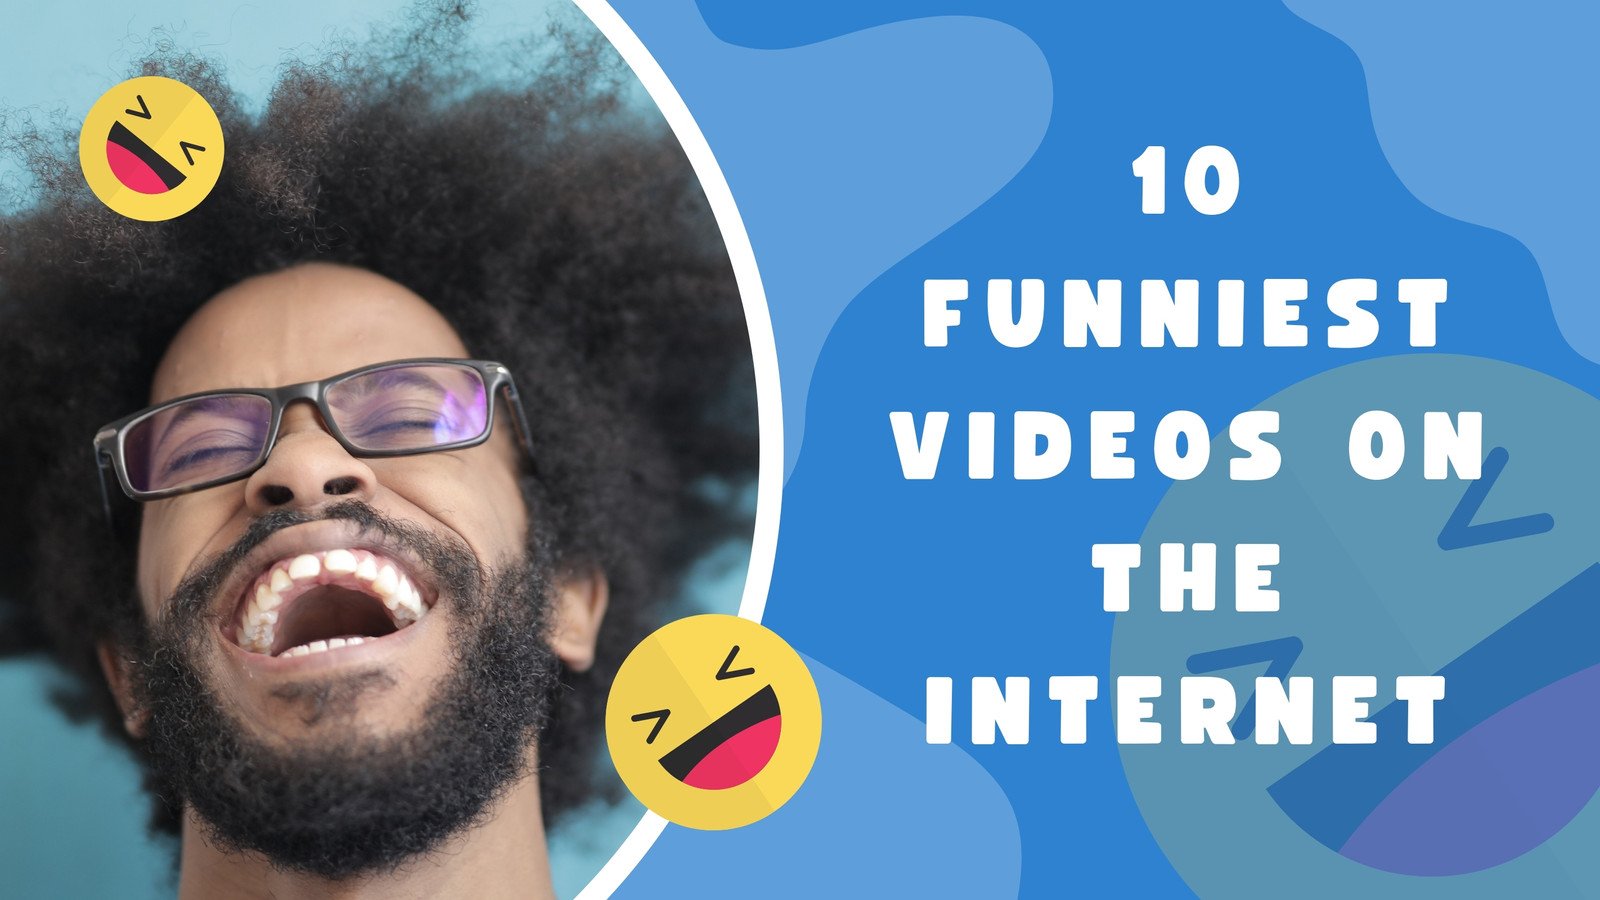 Free and customizable funny templates